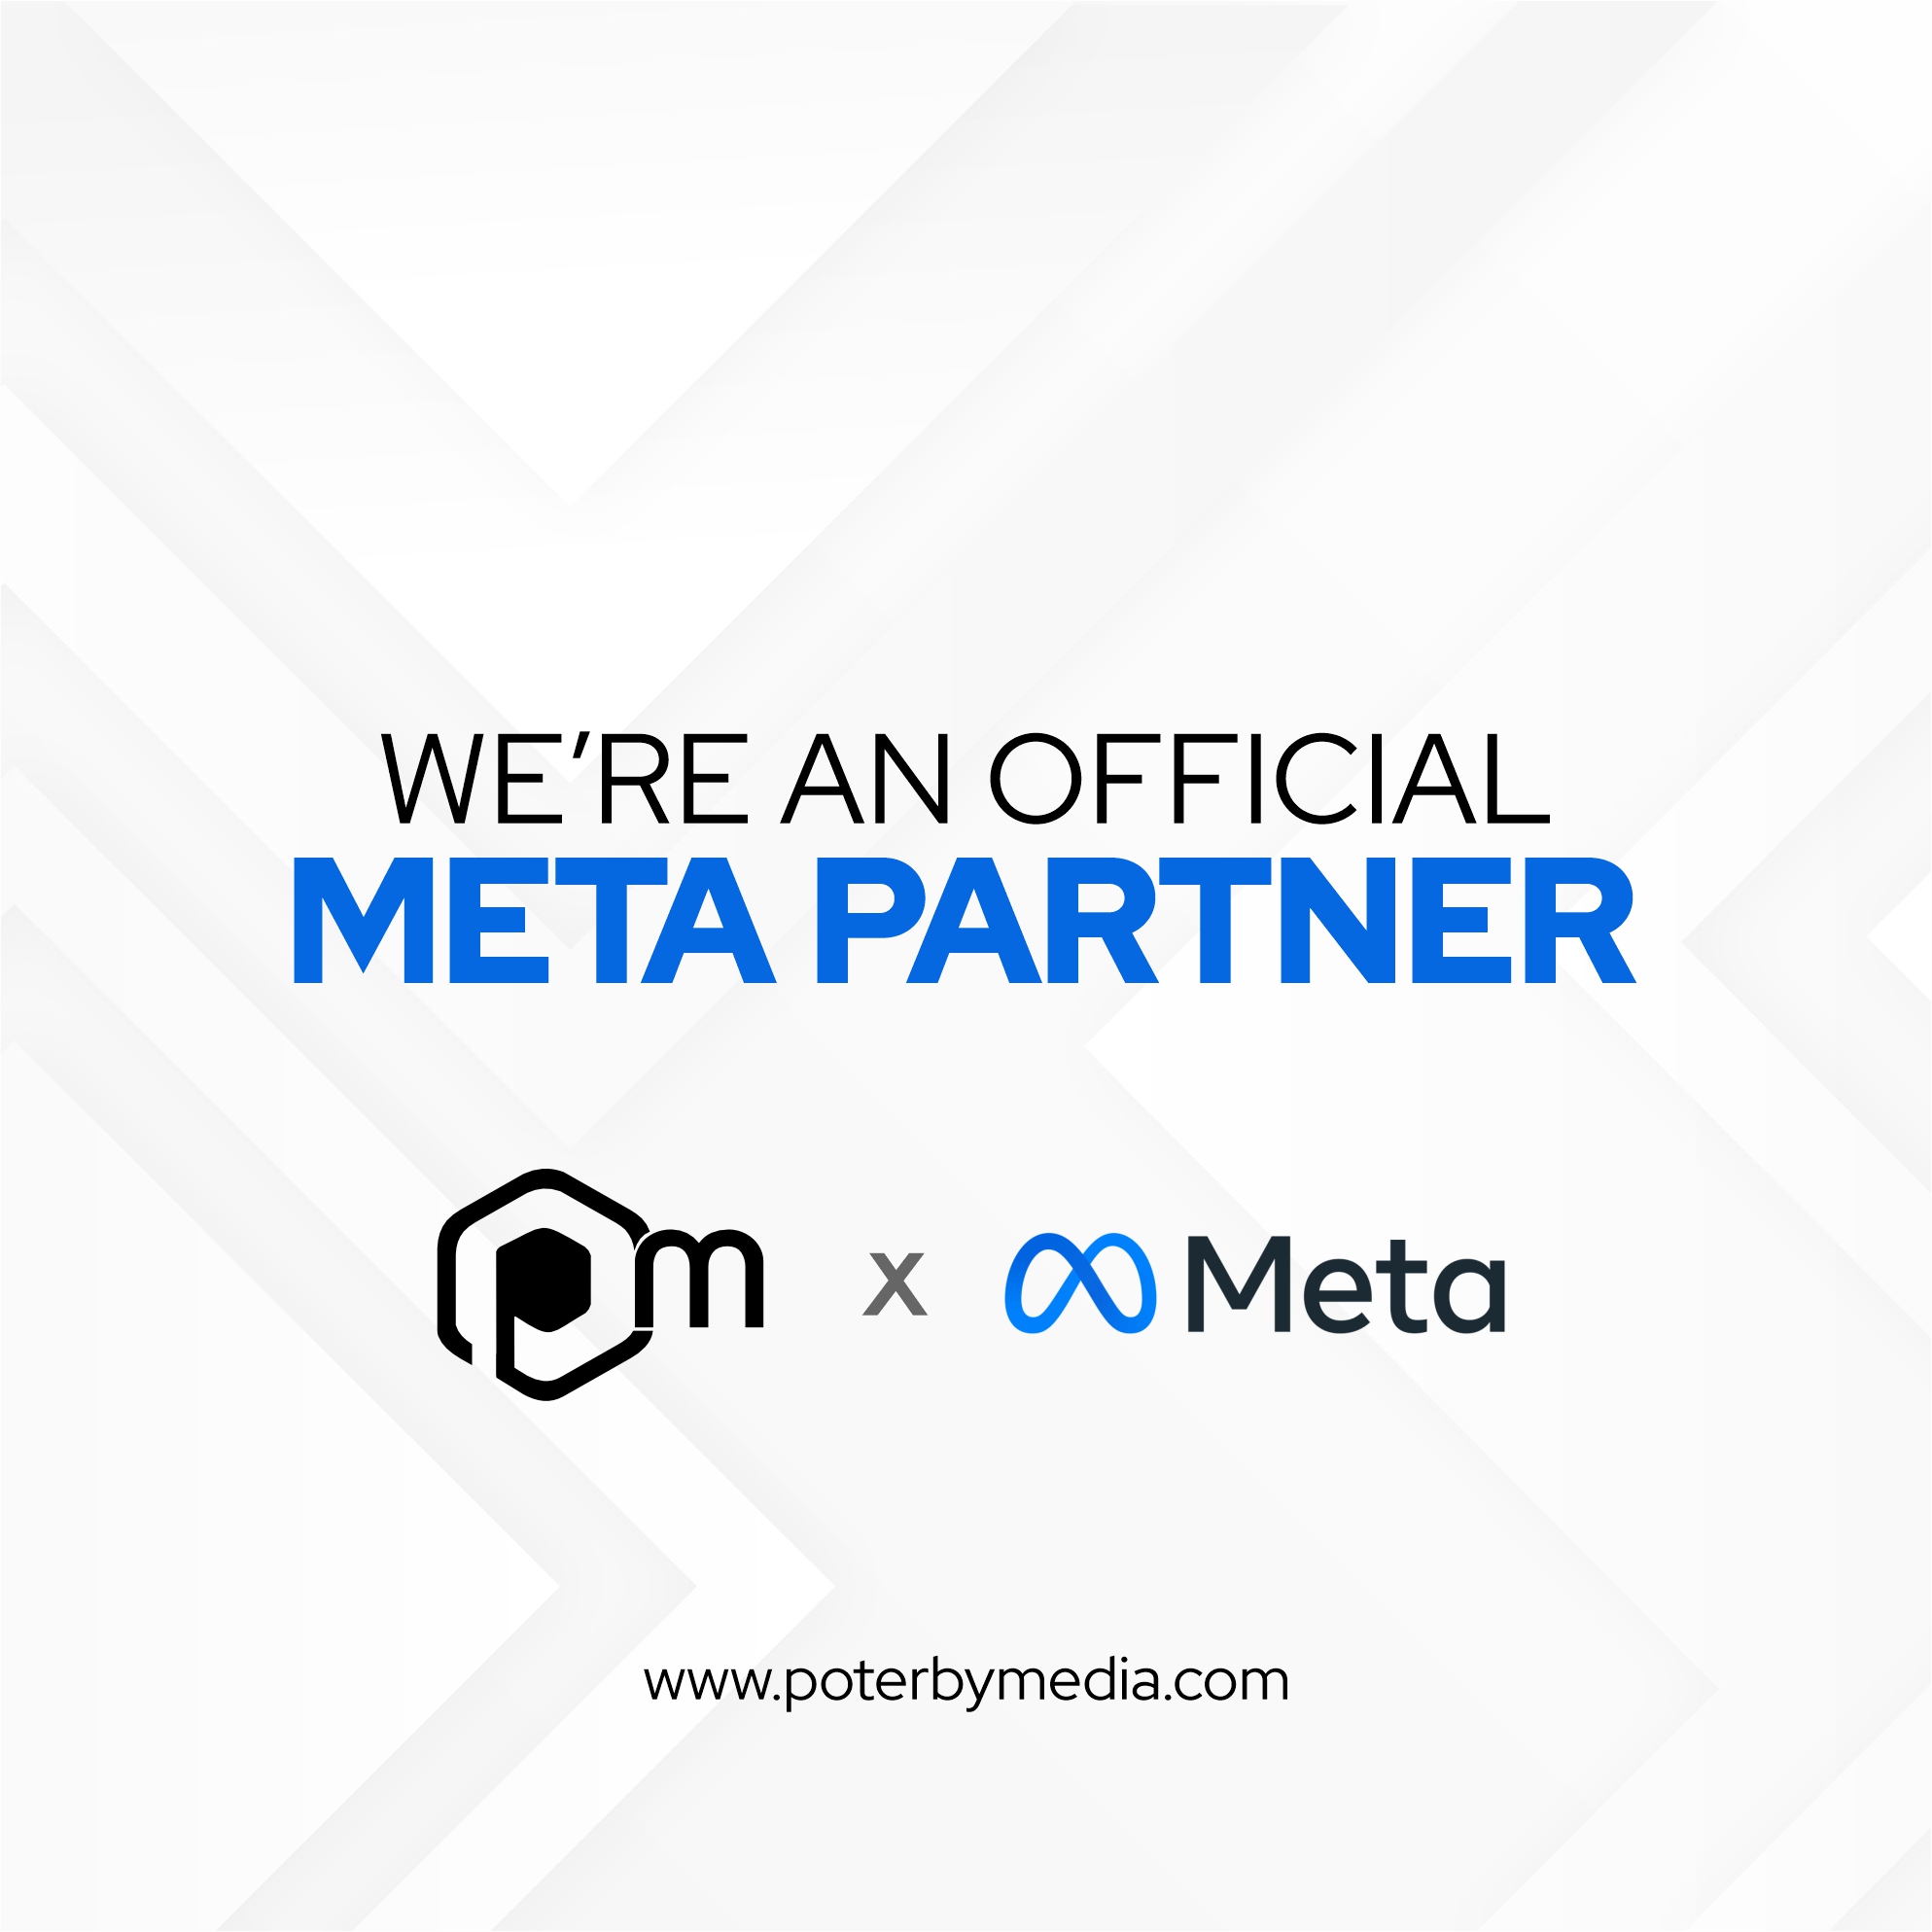 Poterby Media is officially a Meta Business Partner